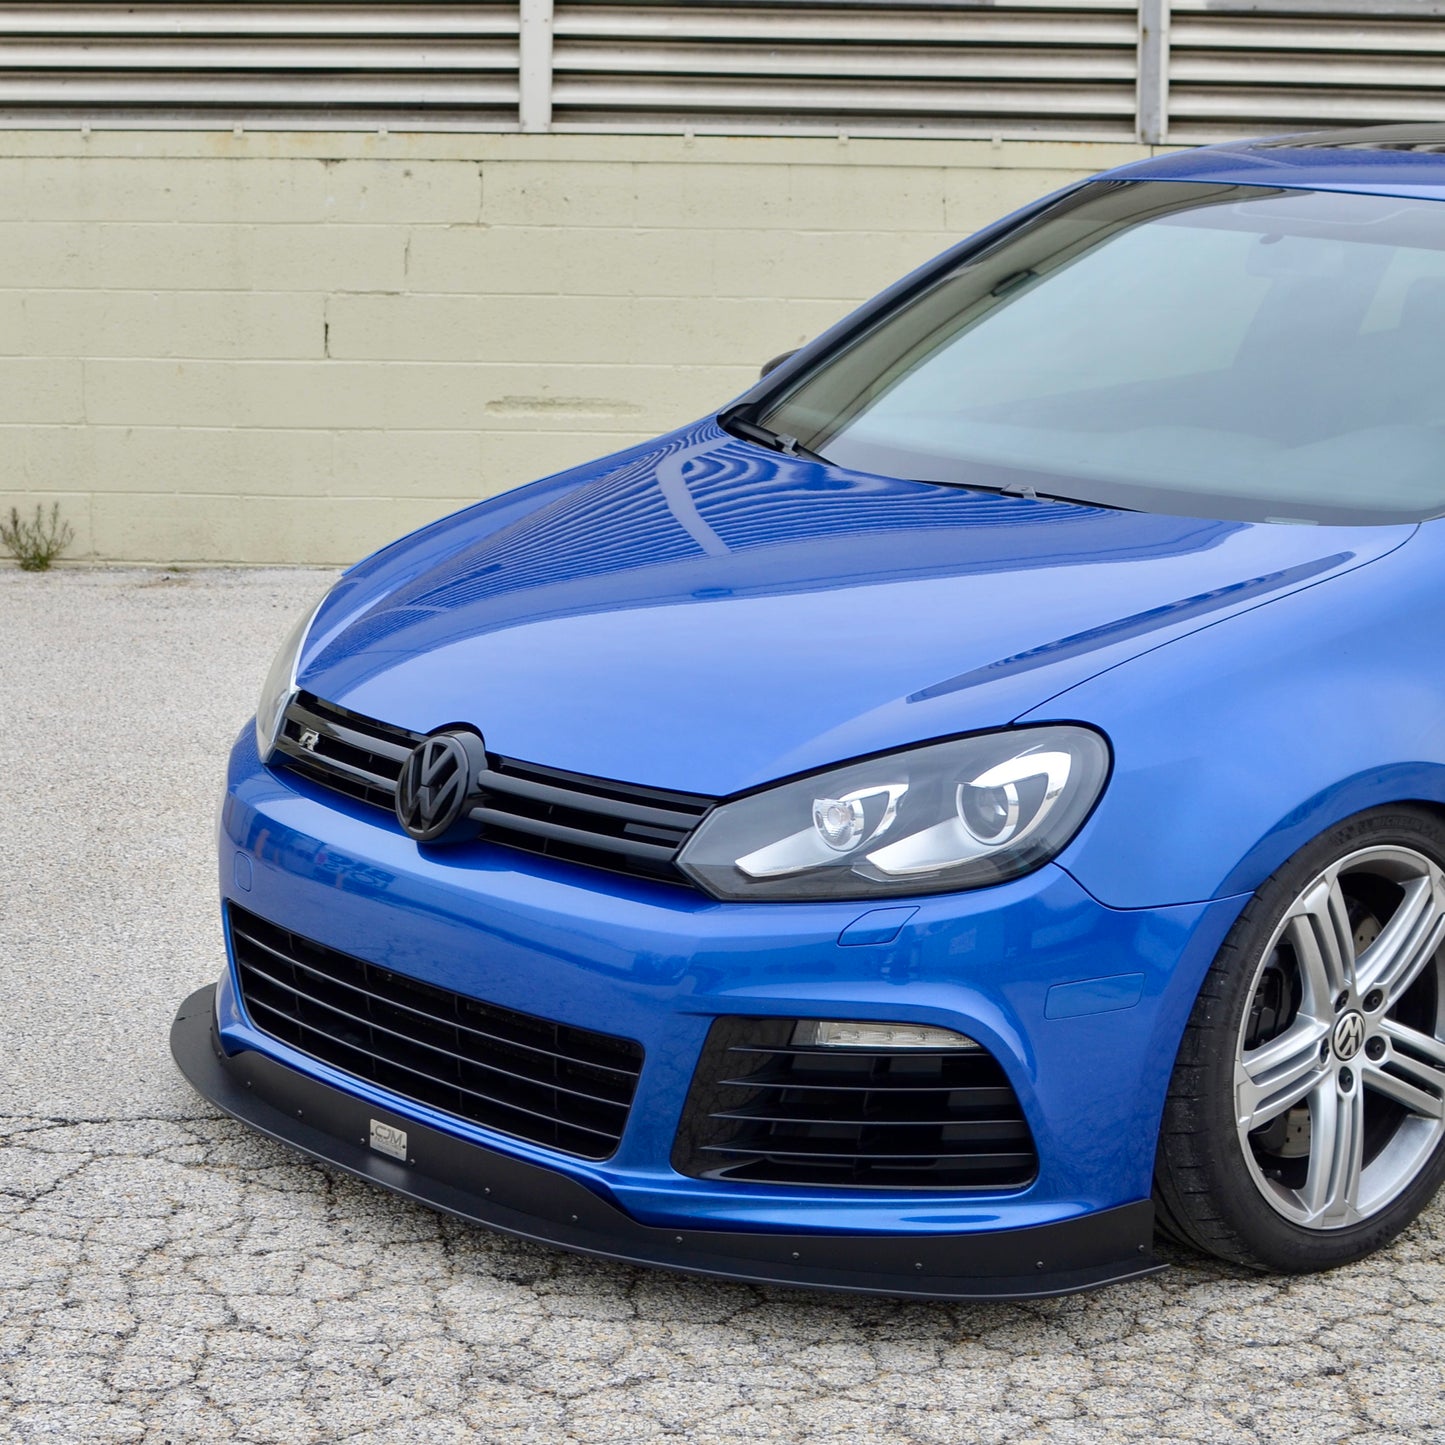 Chassis mounted splitter with air dam - MK6 Golf R (2010-2012) V2